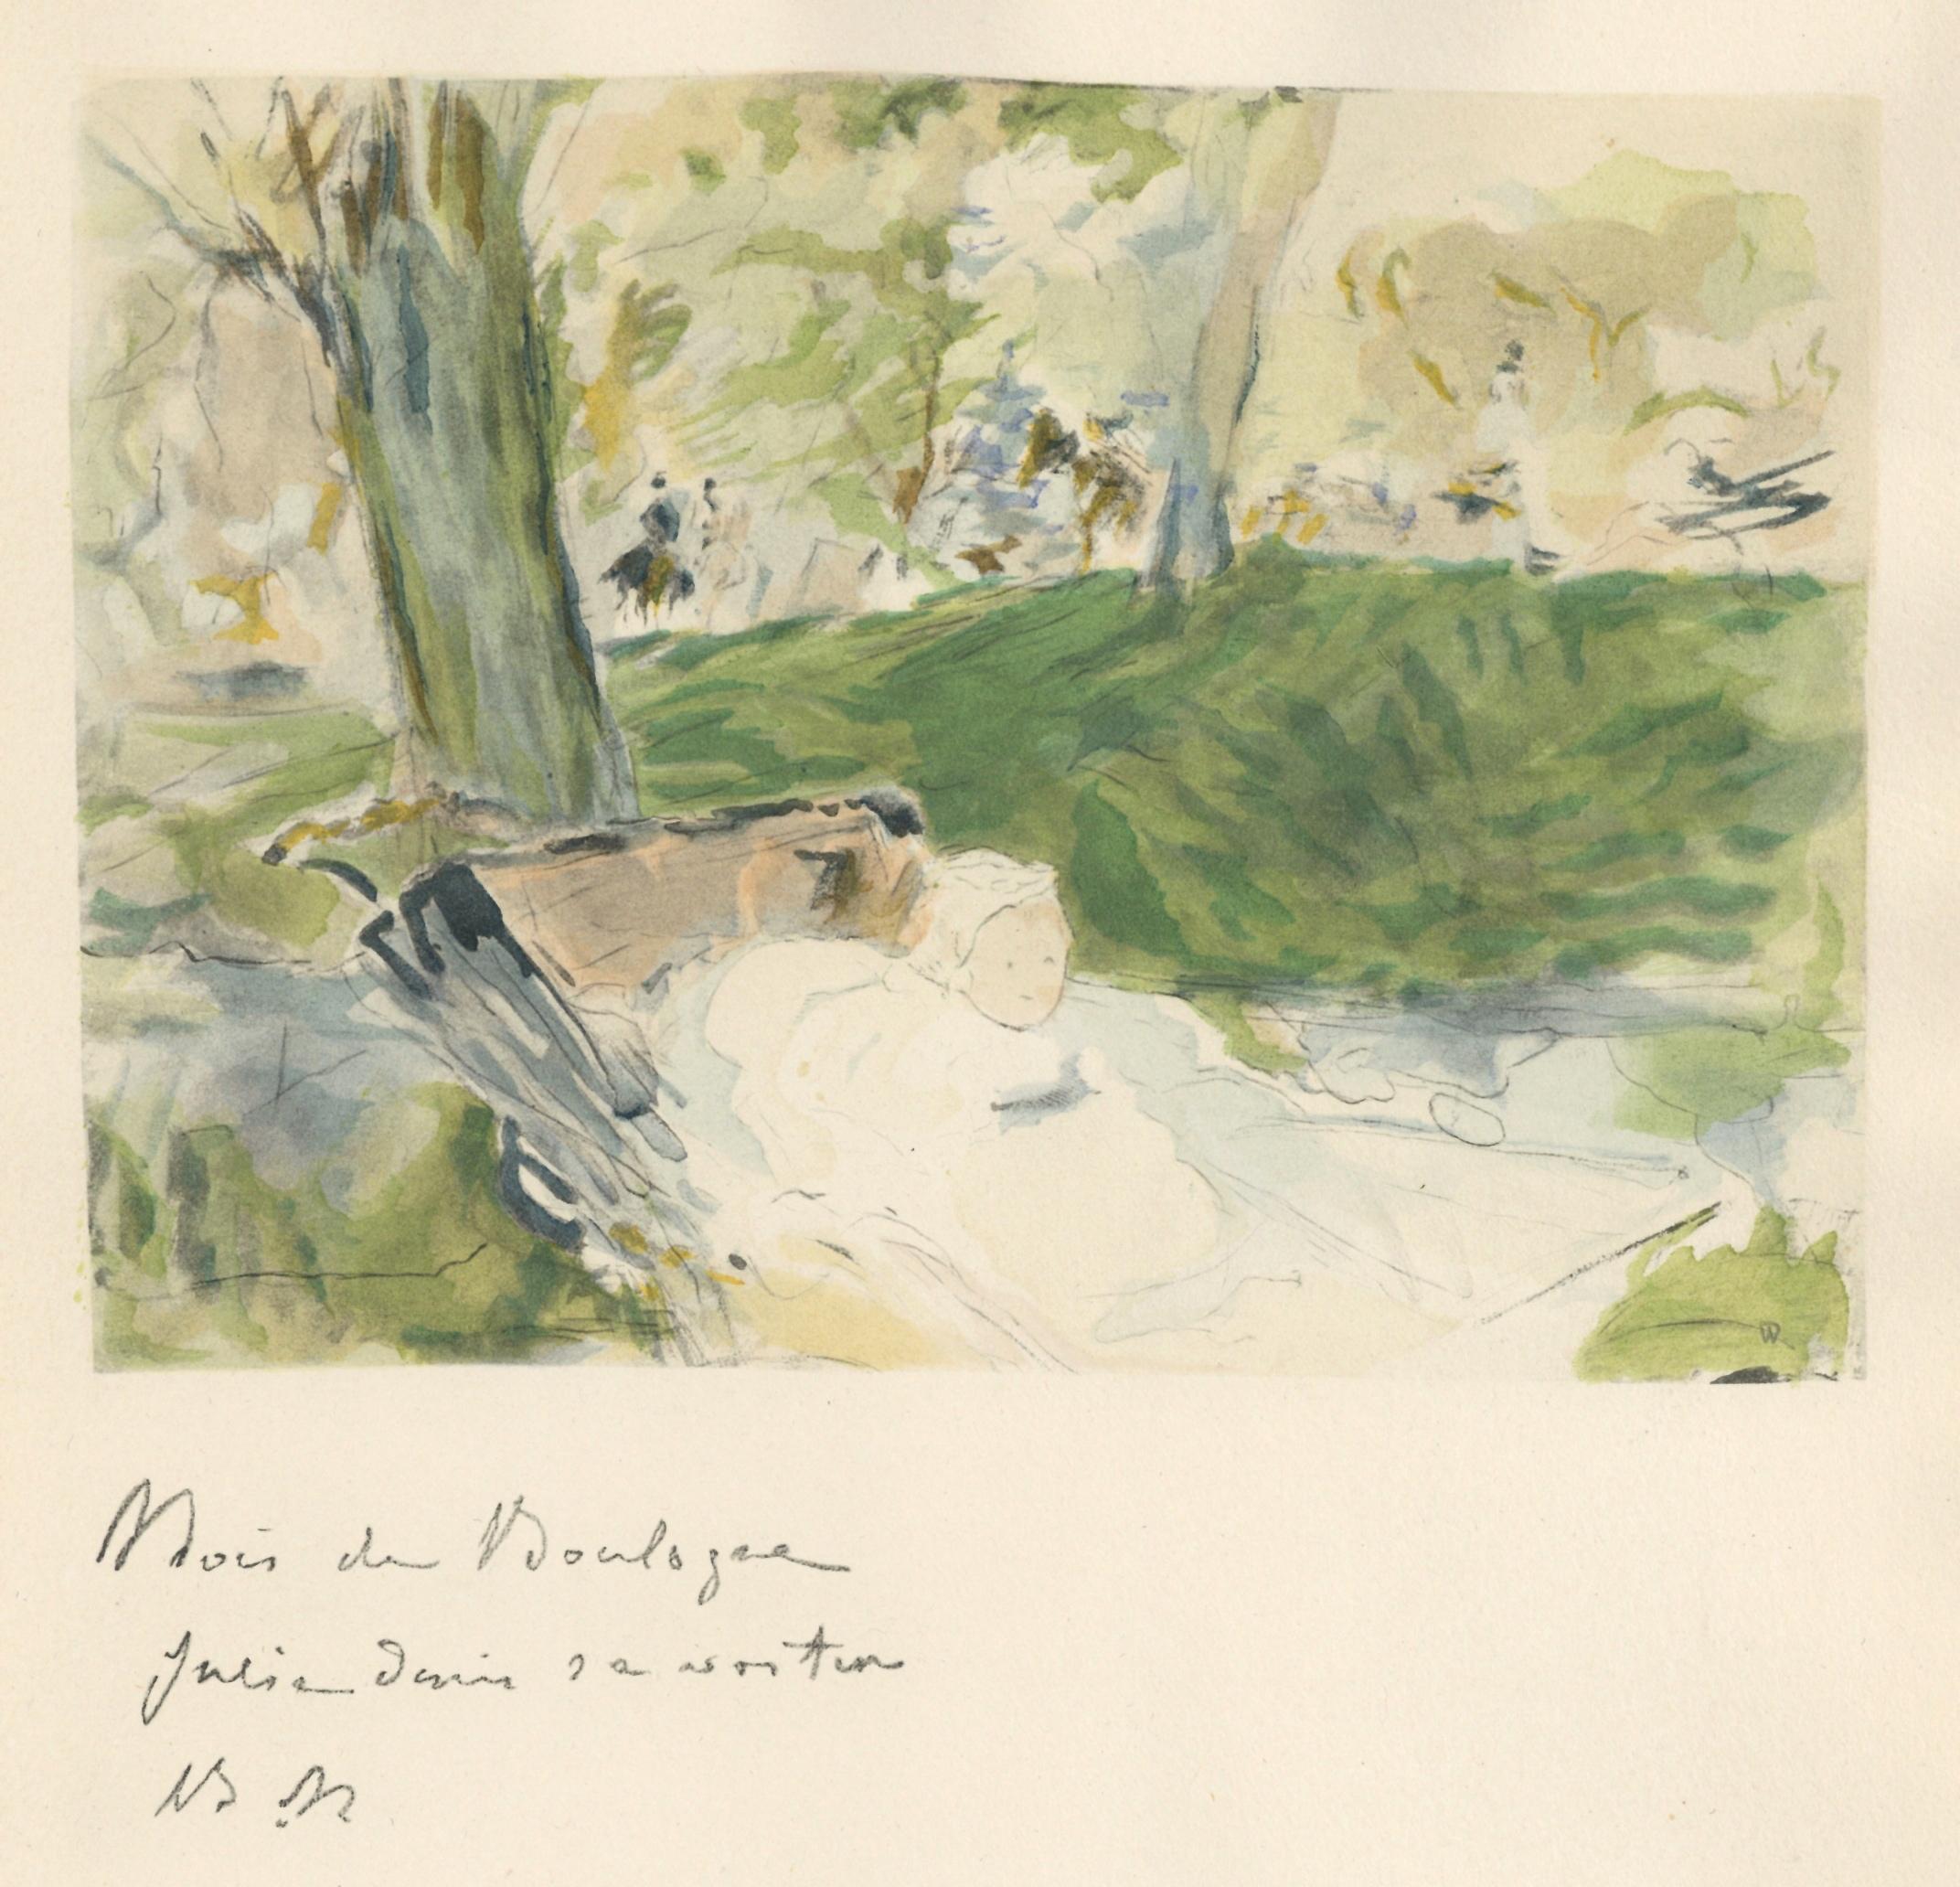 Medium: pochoir (after the 1879 watercolor). Printed 1946 in a limited edition of 300 for the rare "Berthe Morisot Seize Aquarelles" portfolio, published in Paris by Quatre Chemins. The image measures 6 x 8 inches (150 x 206 mm). The total sheet